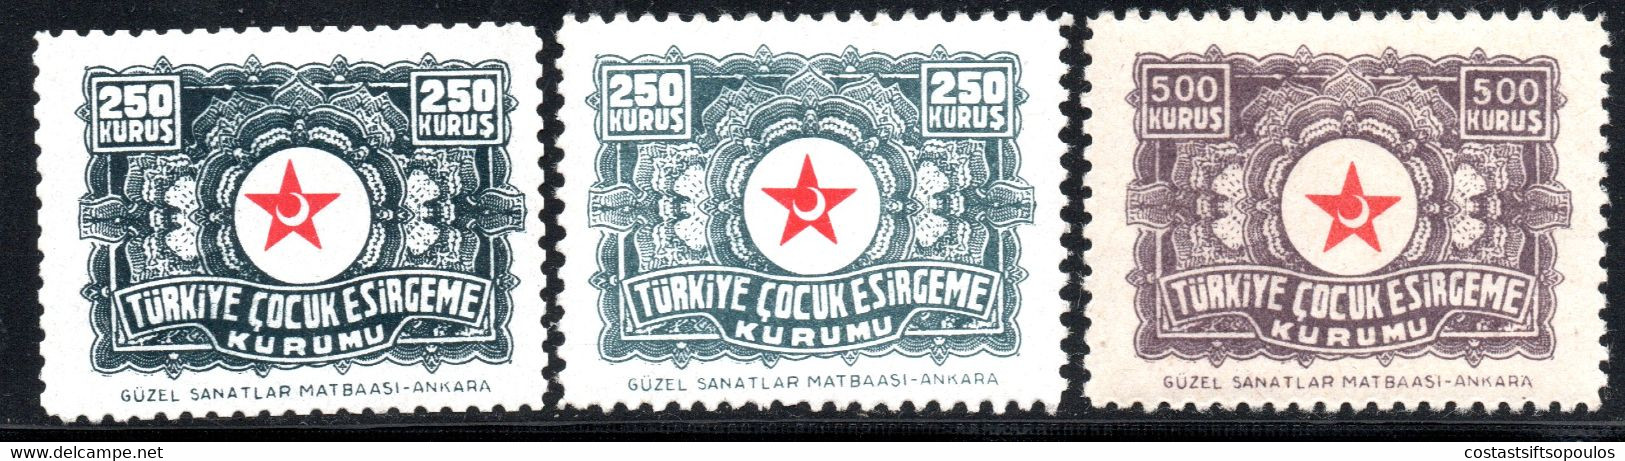 233.TURKEY.1945-1946 CHARITY,PROTECTION OF CHILDREN,ISFILA C62(SHADES).C63.MNH - Unused Stamps